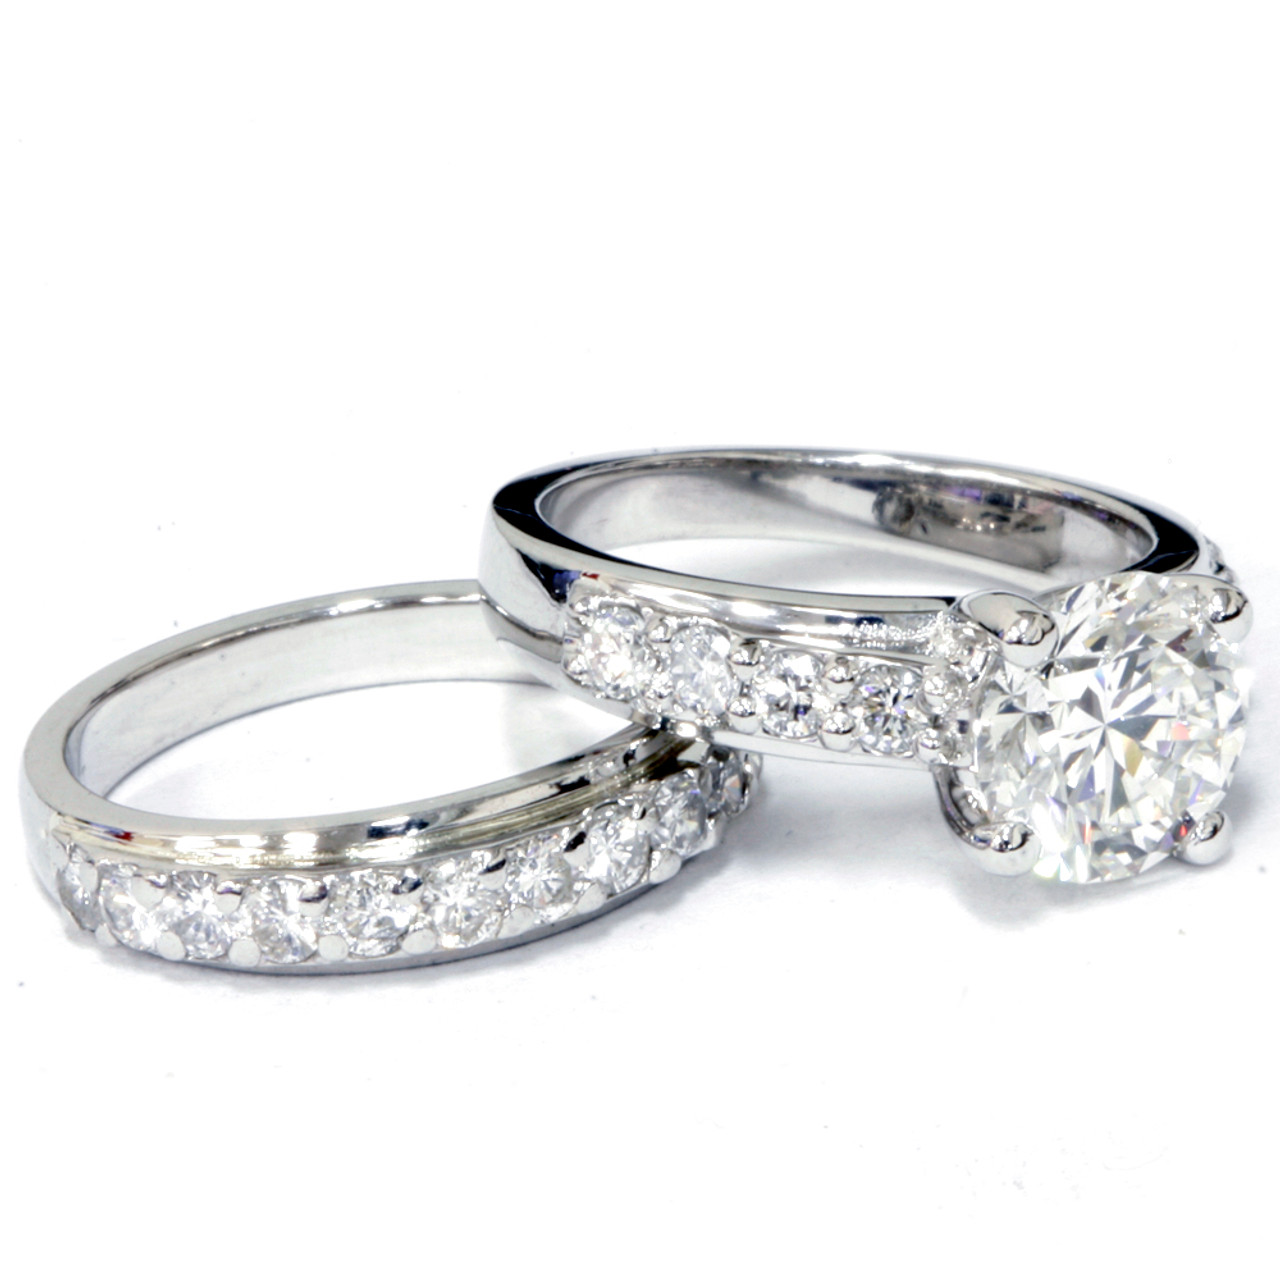 White Gold Wedding Ring Sets For Women Luxury Jewelry Sz 5 10 10kt 